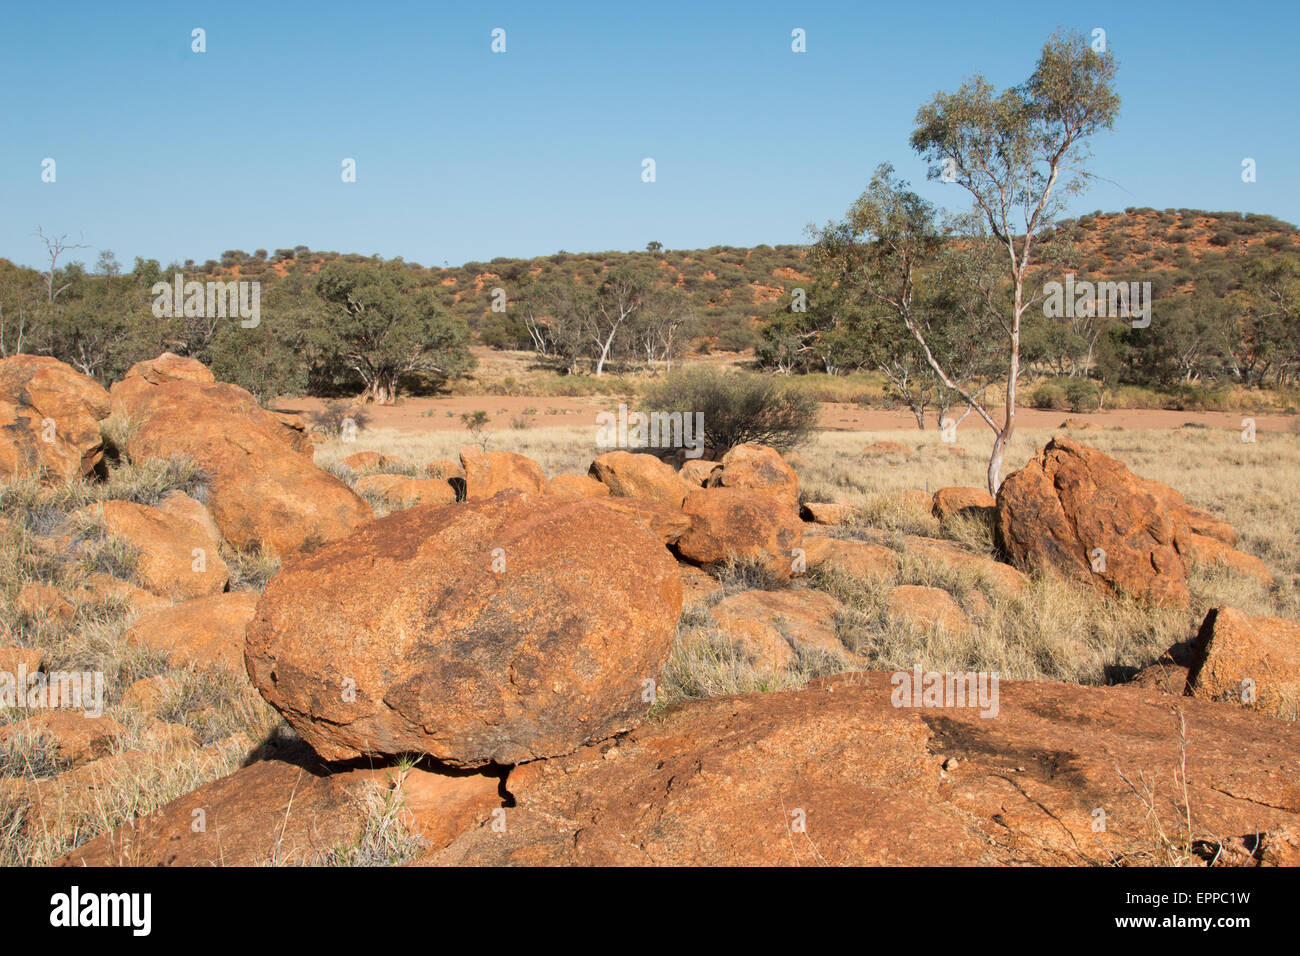 Red sandstone boulders in a sparsely vegetated, dry sclerophyll woodland habitat, Northern Territory, Australia Stock Photo